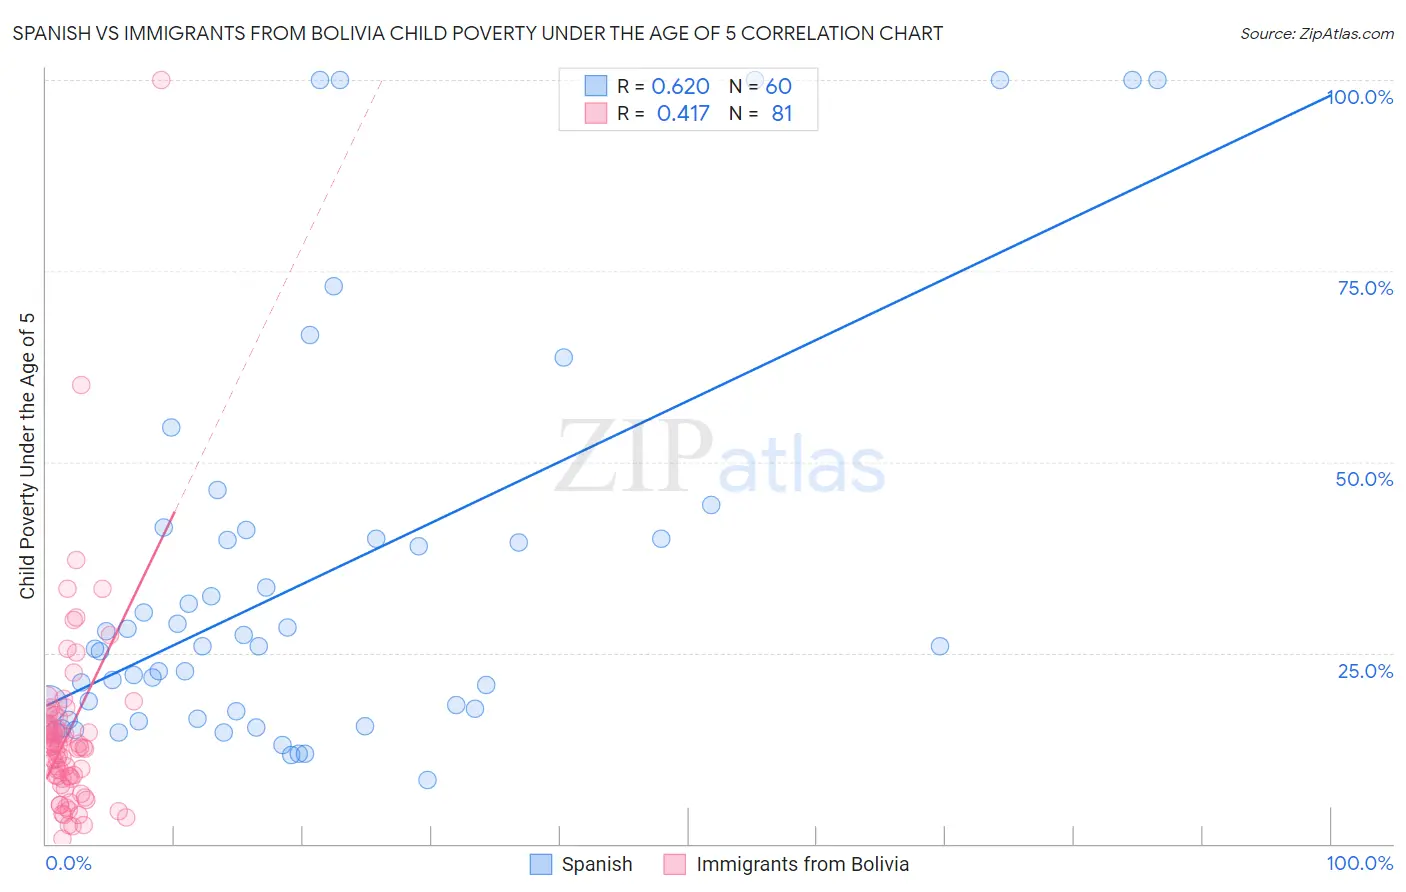 Spanish vs Immigrants from Bolivia Child Poverty Under the Age of 5